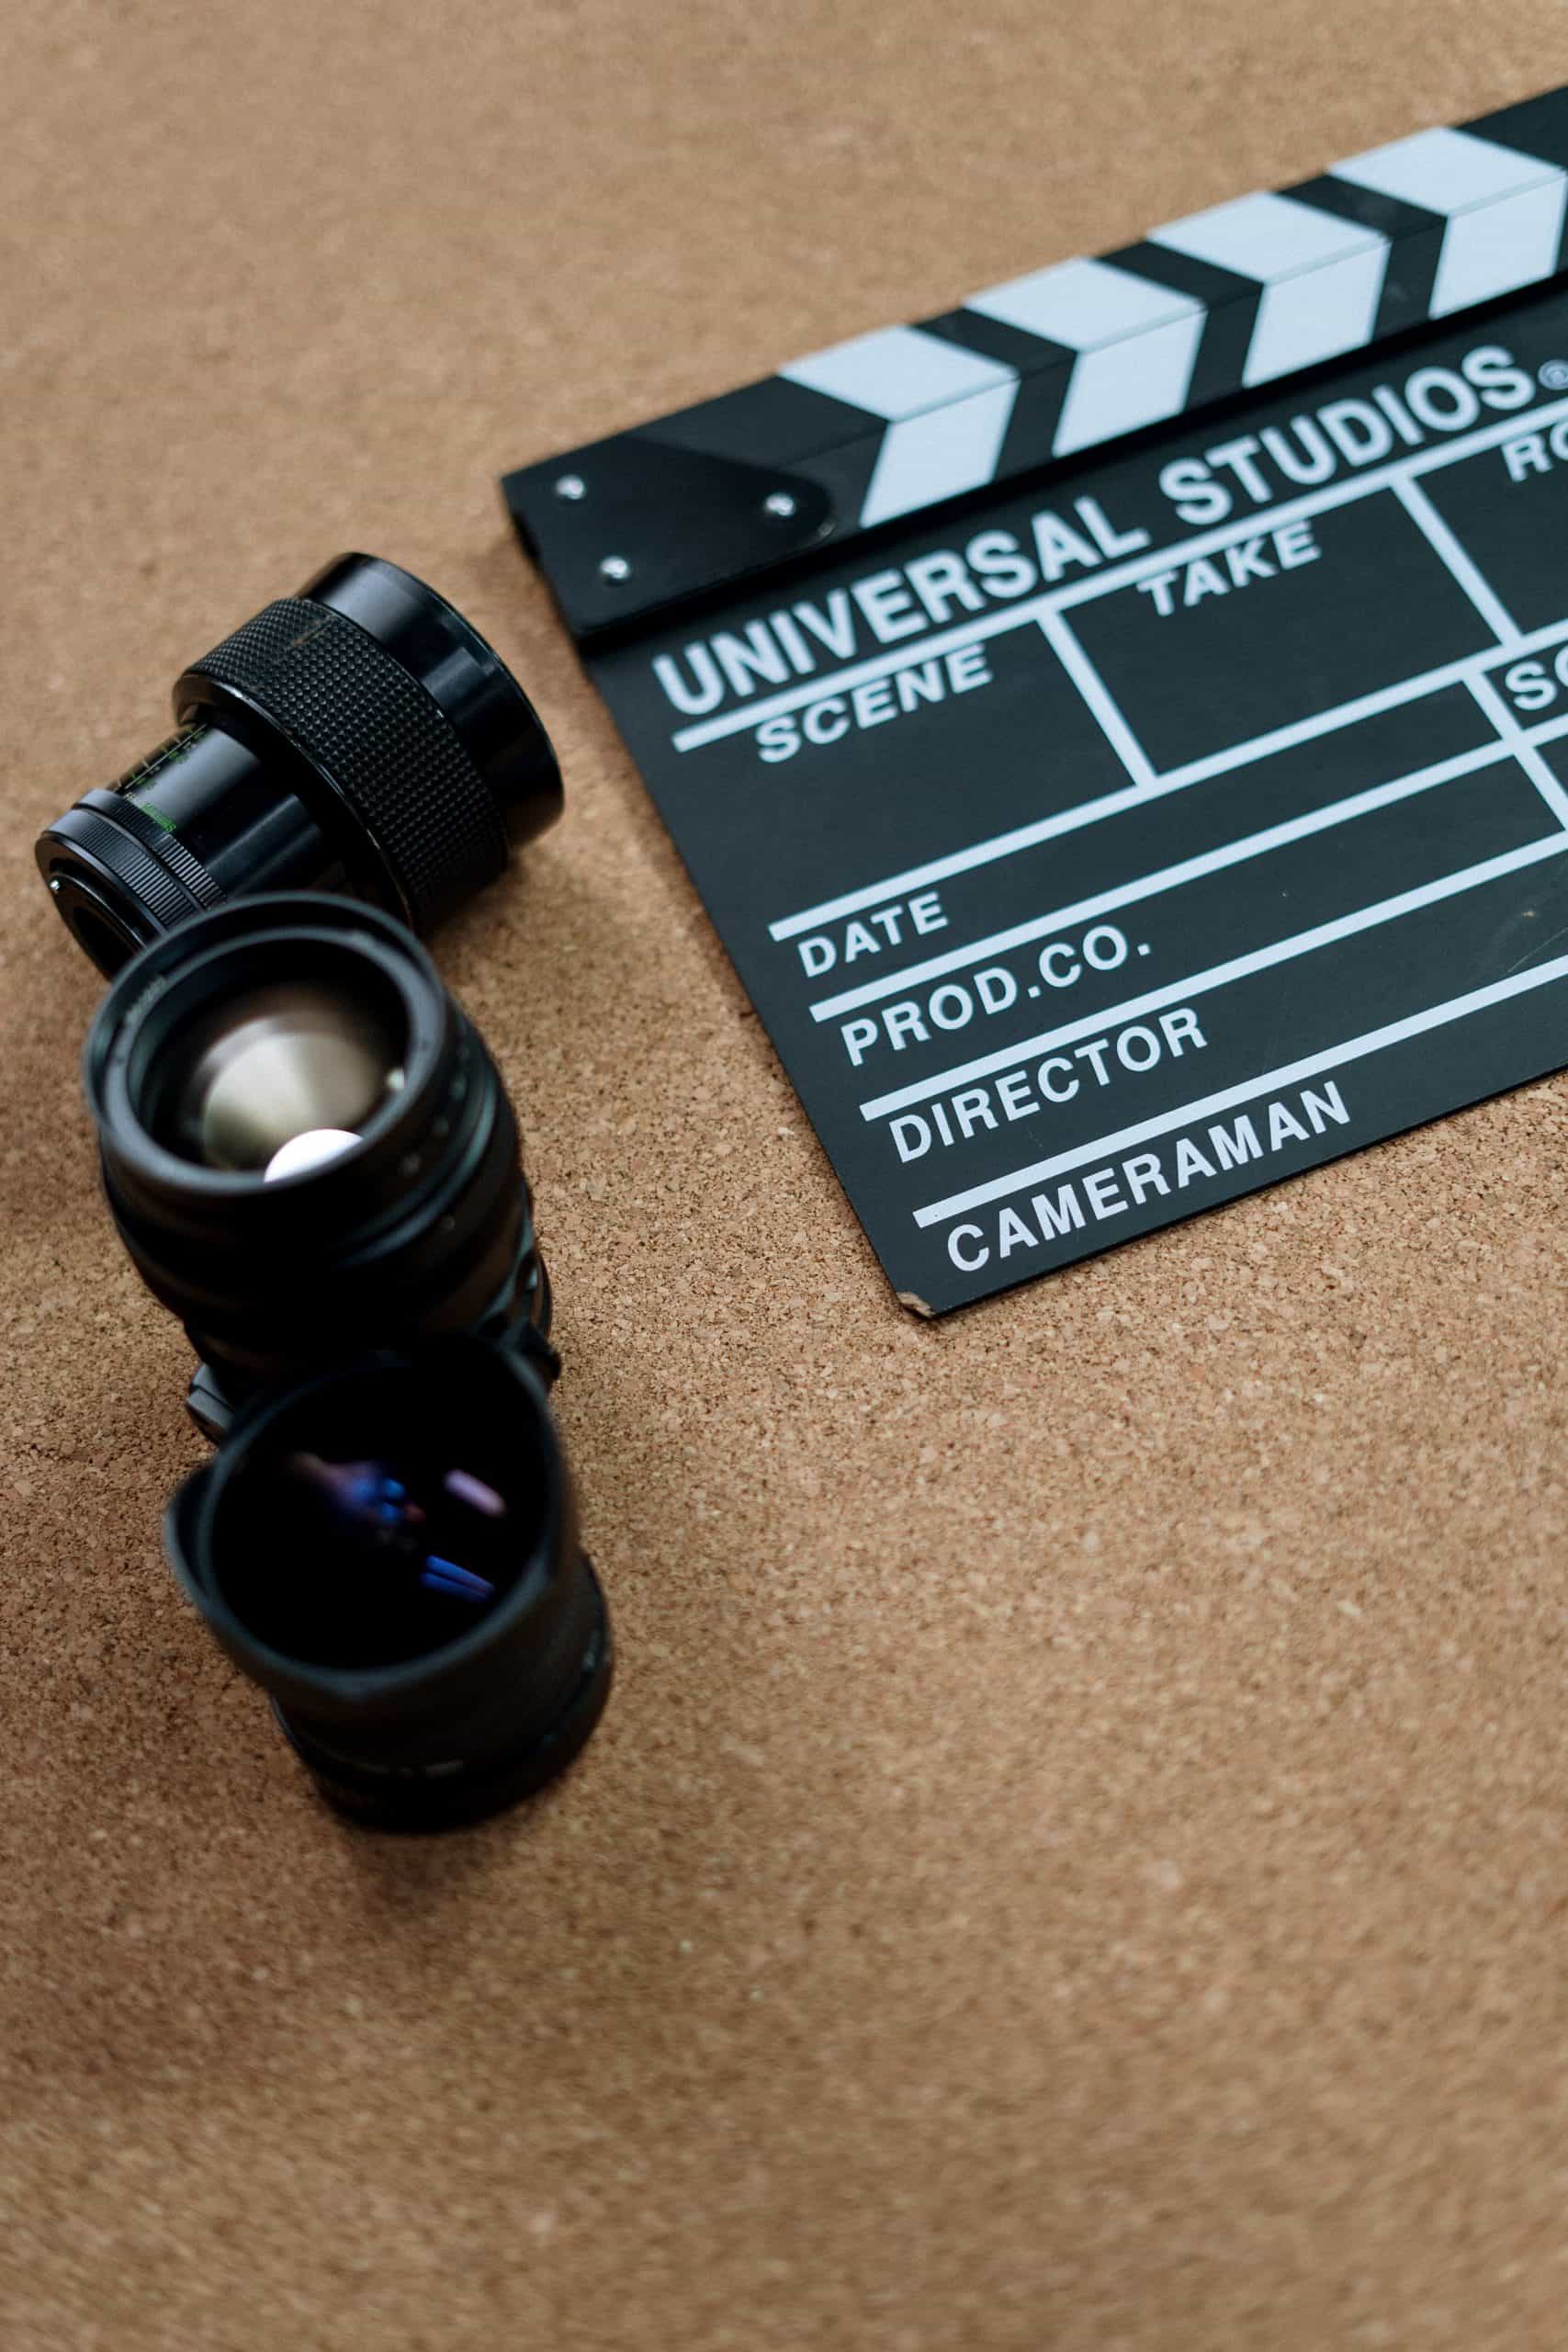 The dos and don'ts of filmmaking in Hollywood